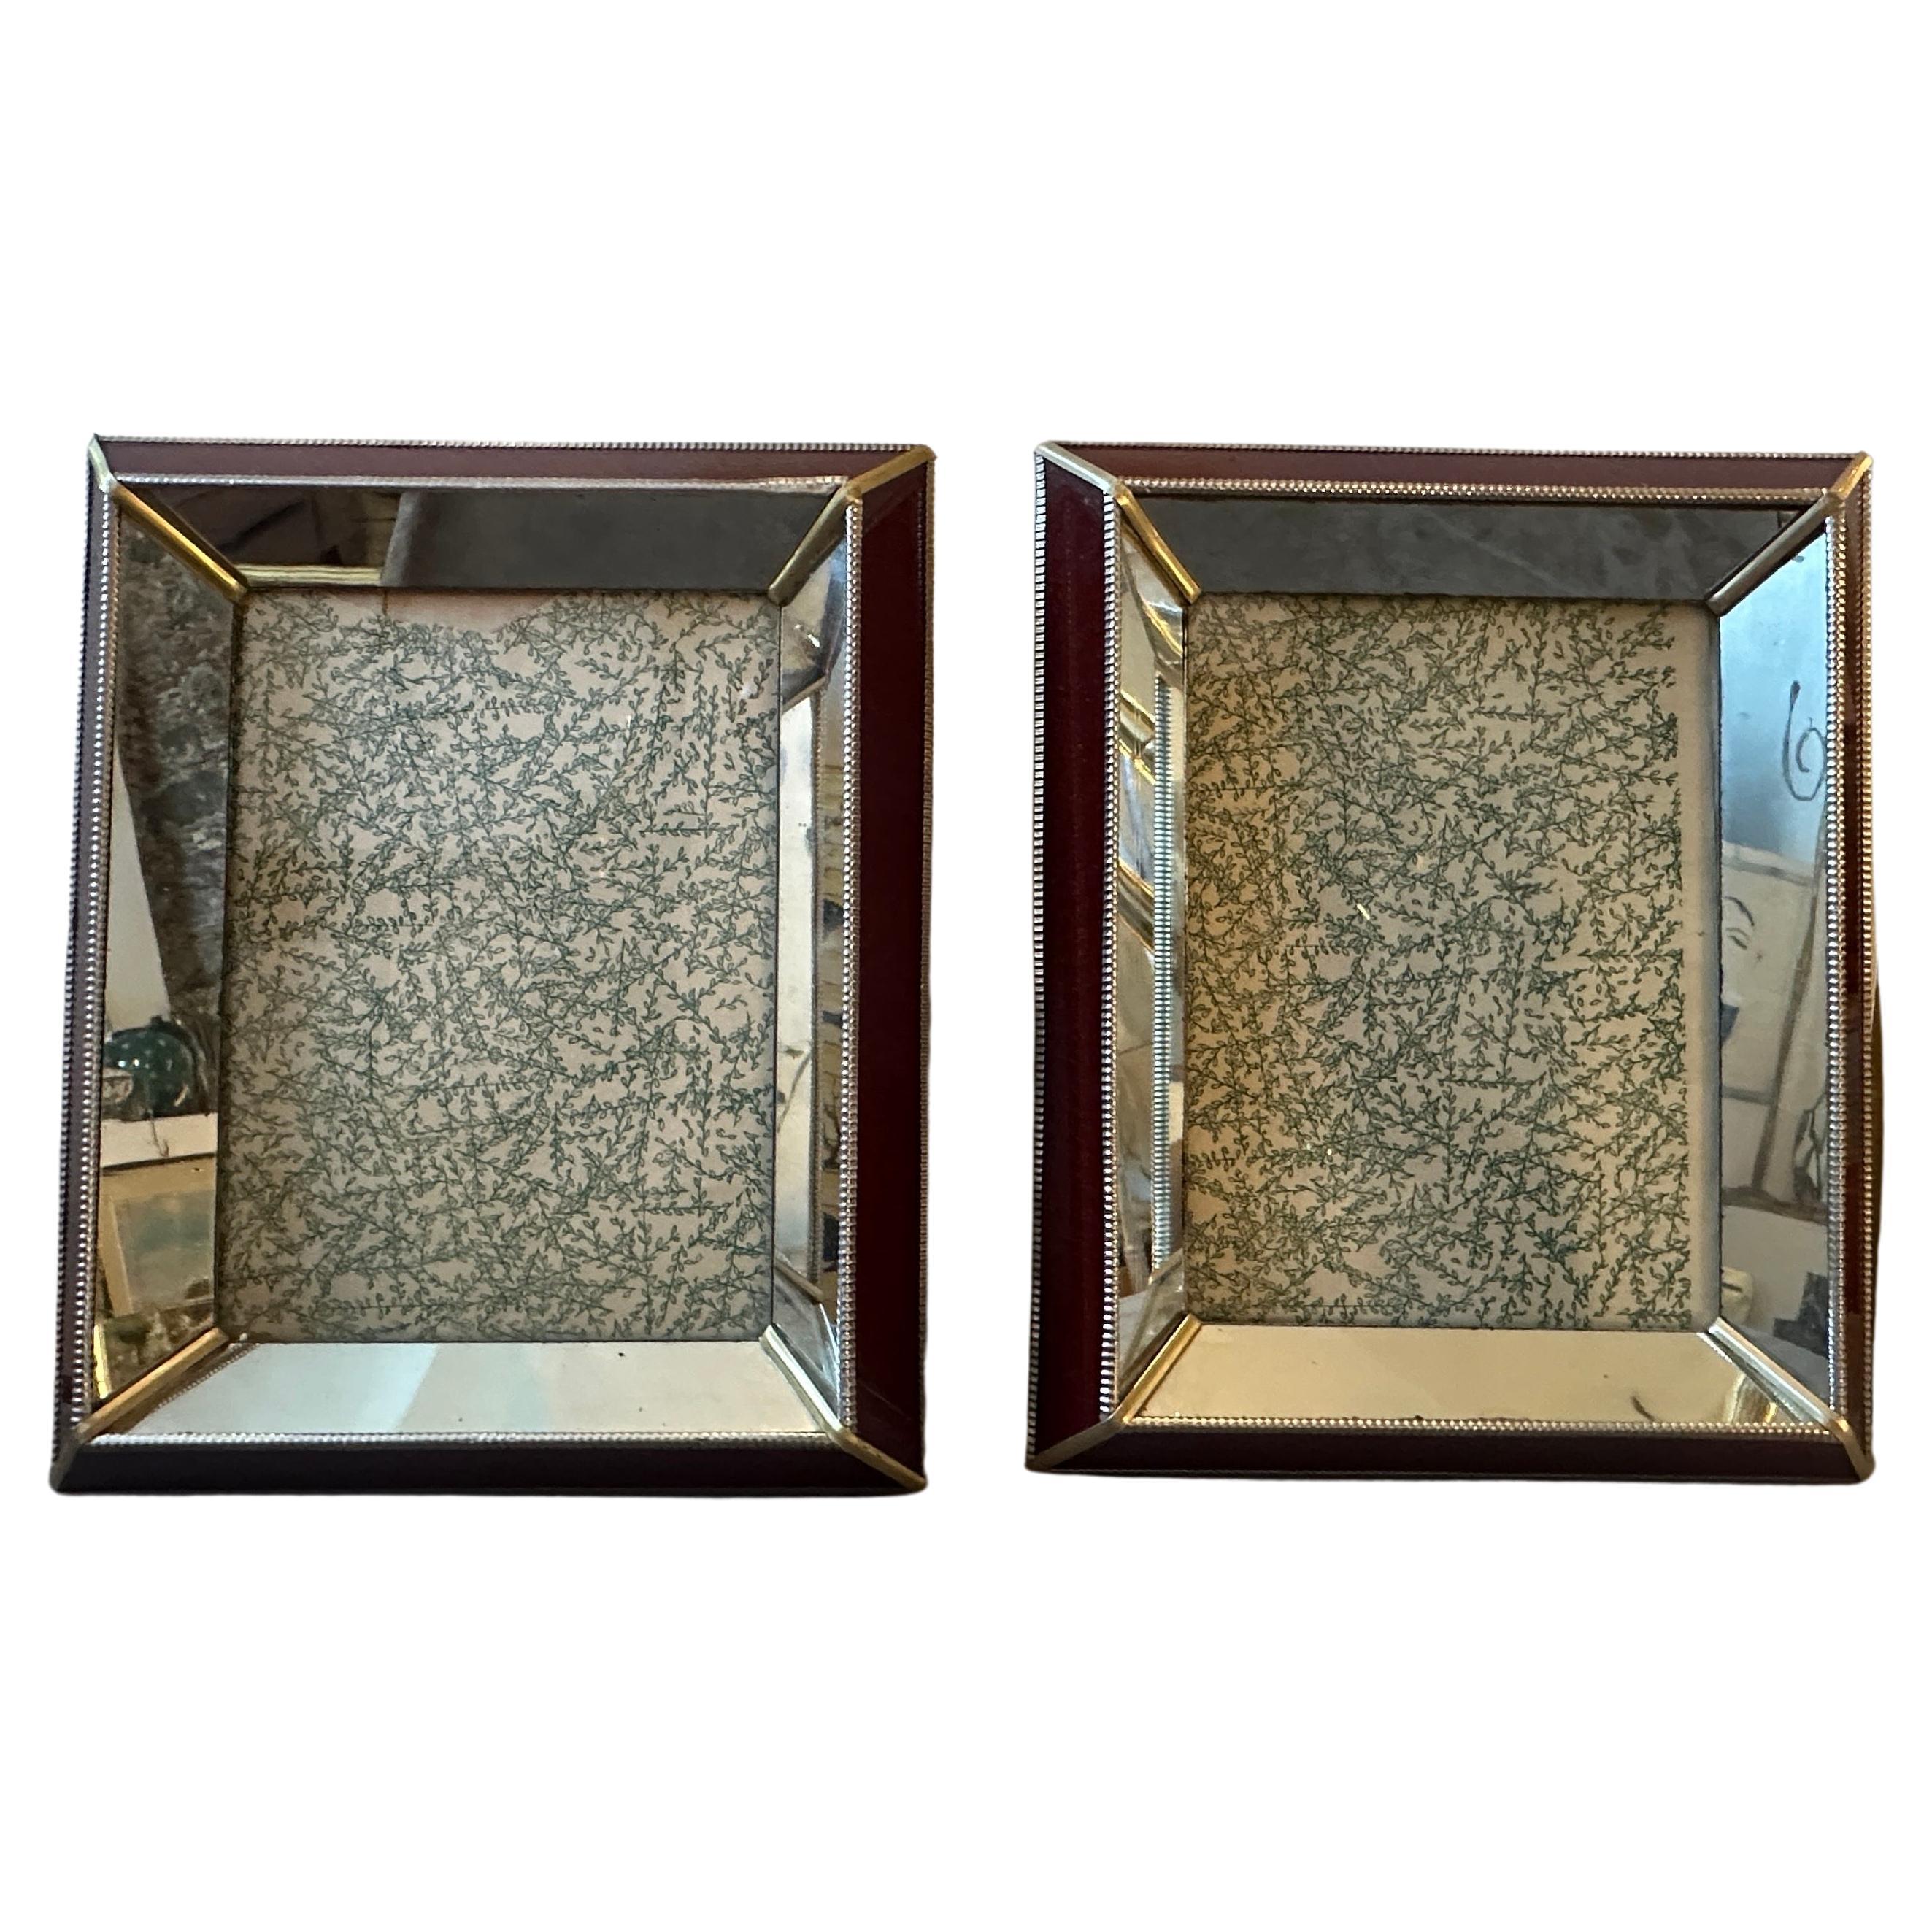 Two 1940s Art Deco Rectangular Picture Frames manufactured in Italy in the Thirties, they are stunning and elegant pieces that embody the design aesthetics of the Art Deco era. This exquisite picture frames have been meticulously crafted with a